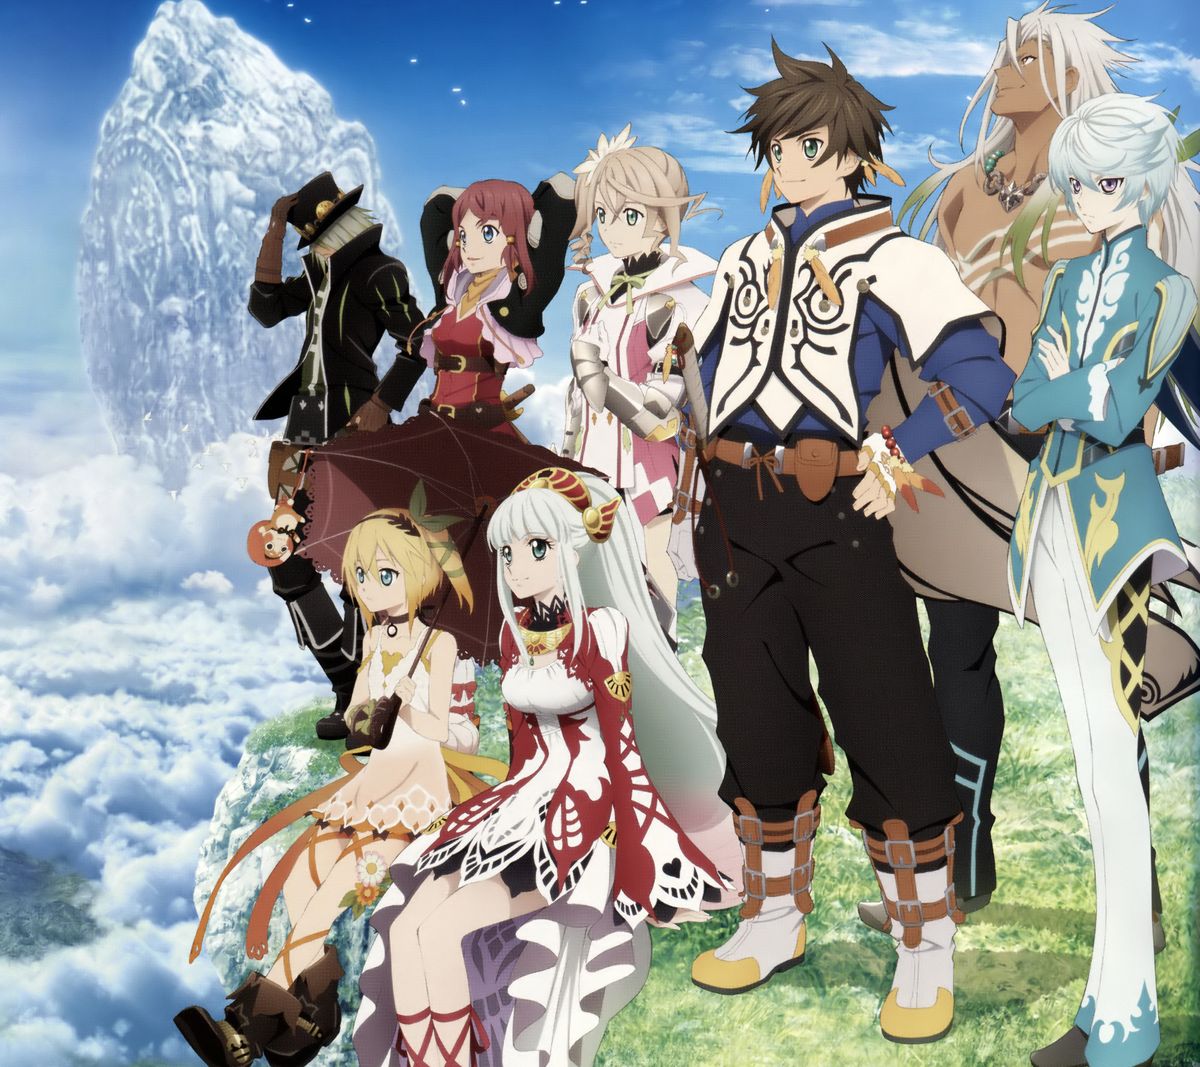 Tales of Zestiria - Digital Edition (Chinese Ver.)